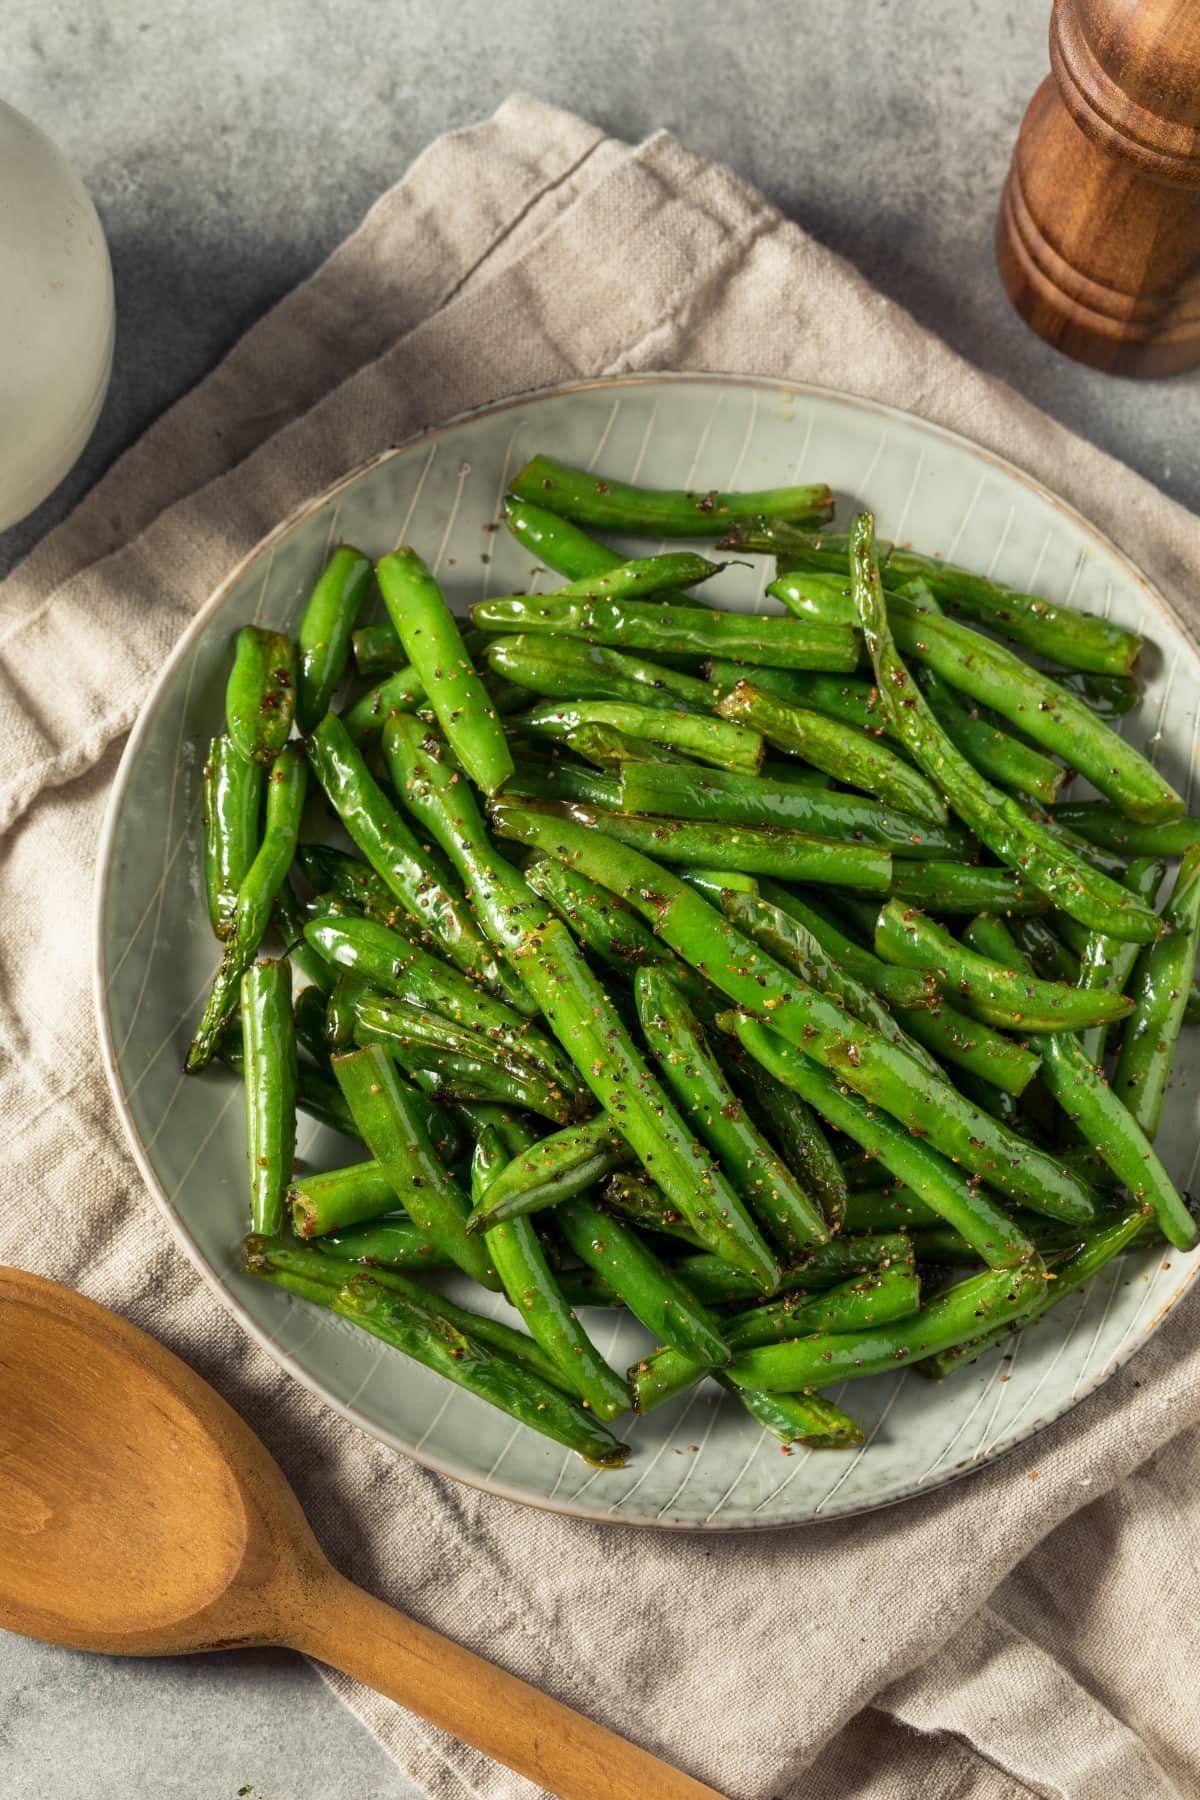 https://insanelygoodrecipes.com/wp-content/uploads/2023/07/Homemade-Sauteed-Green-Beans-with-Salt-and-Pepper.jpg